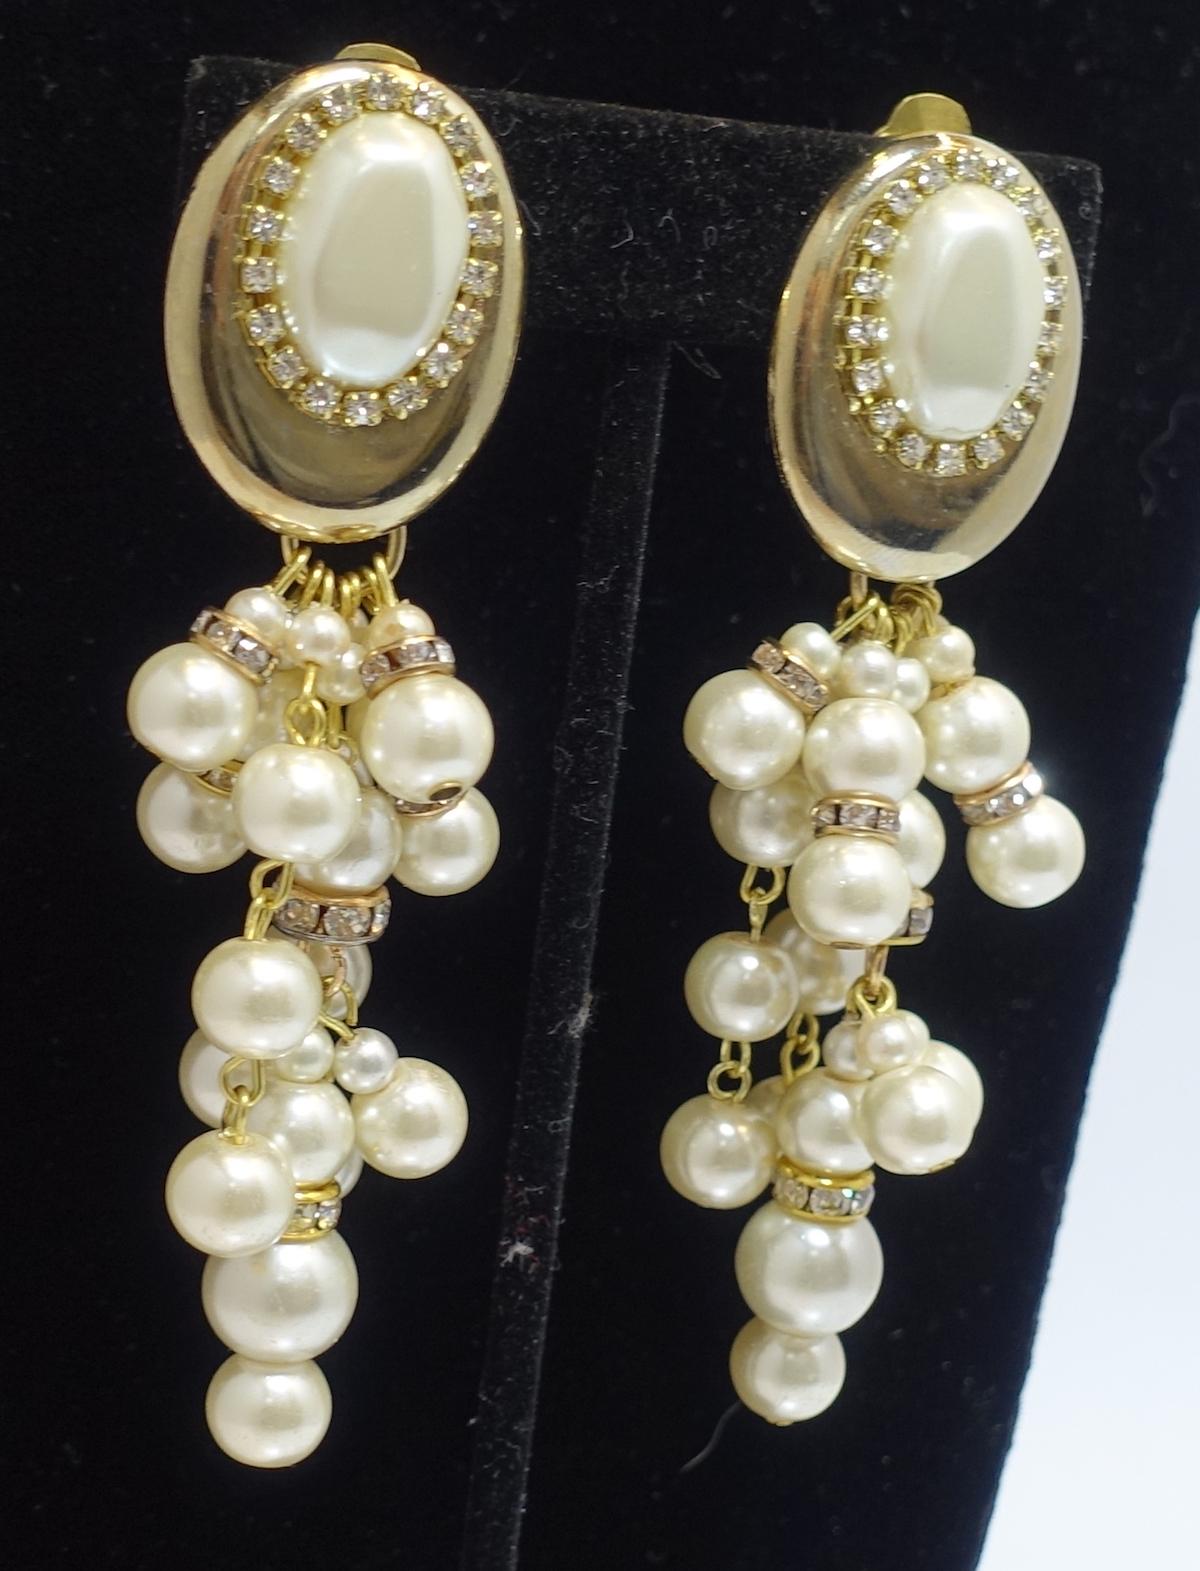 These vintage signed DeMario earrings feature faux pearls with clear rhinestone accents in a gold tone setting.  These clip earrings measure 3-1/2” long x 1” wide and signed “DeMario”. They are in excellent condition.